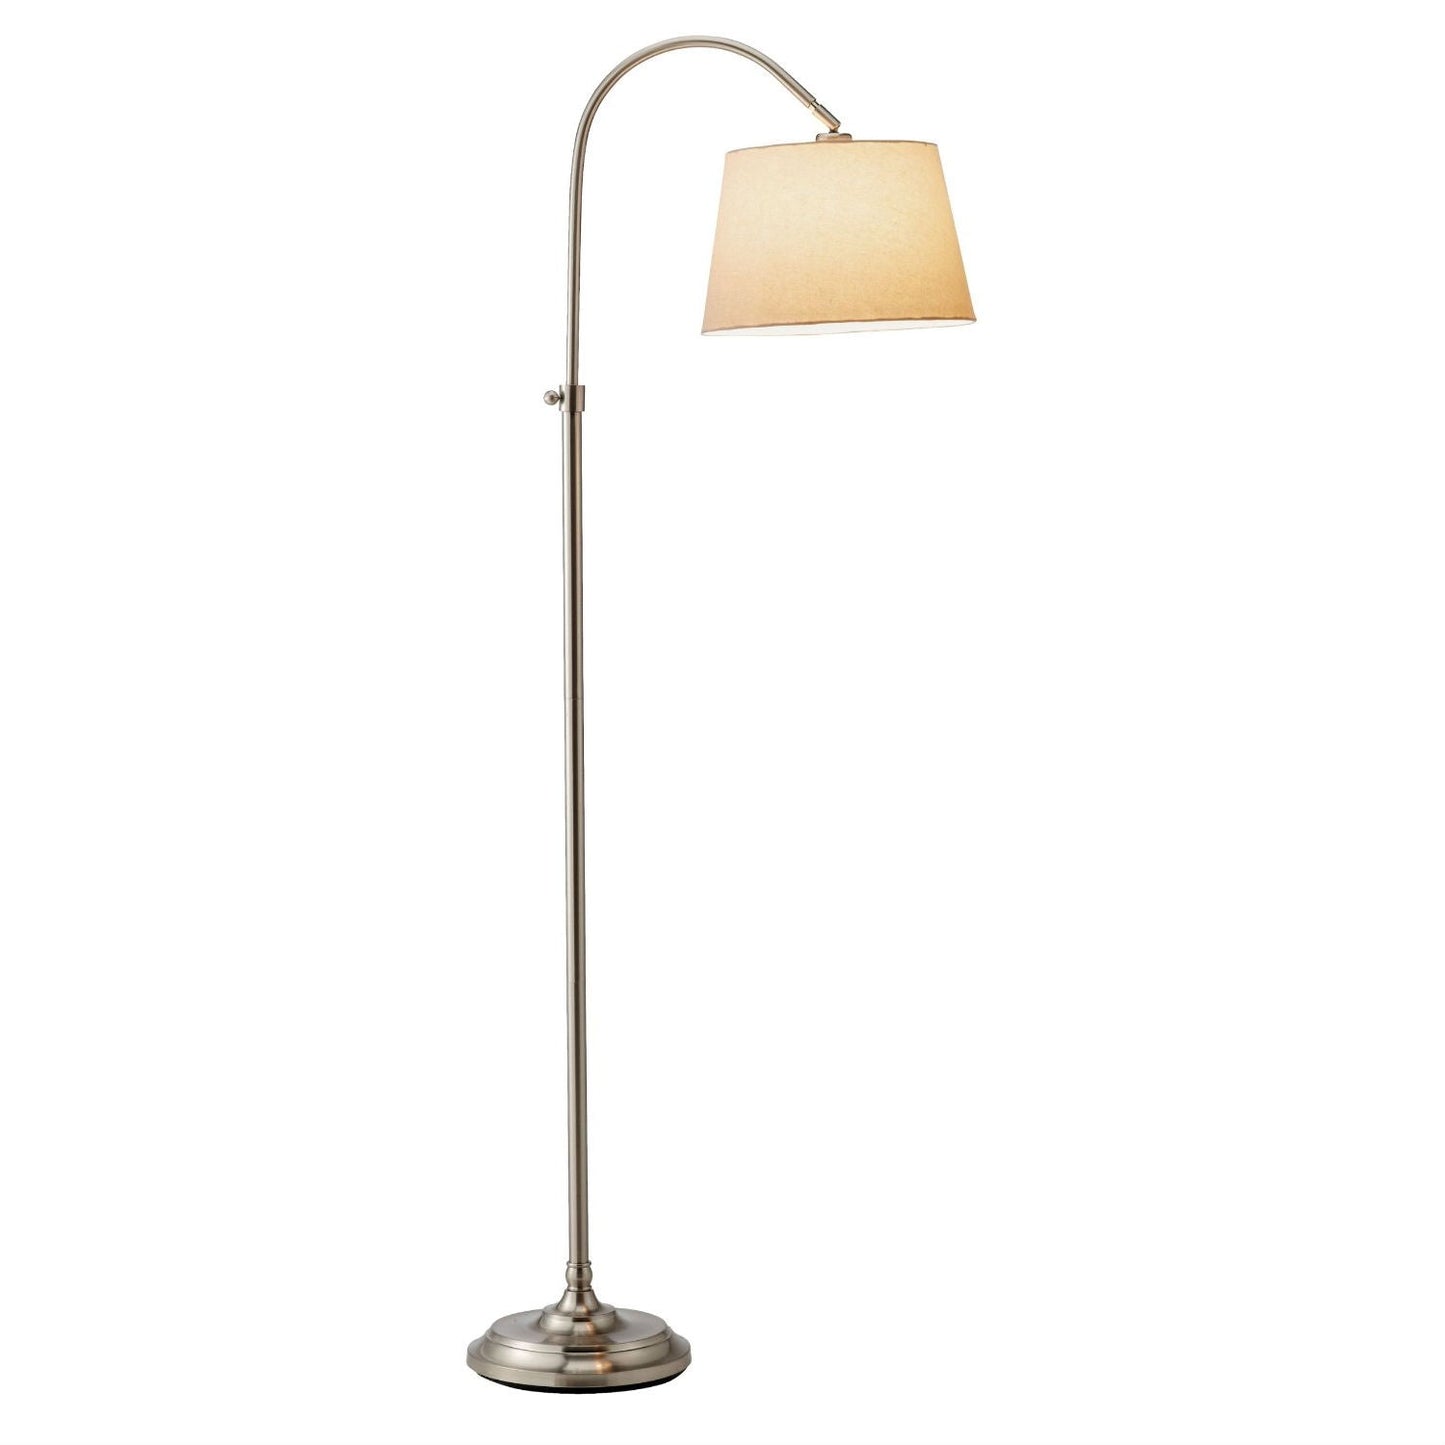 Lighting > Floor Lamps - Elegant Arch Floor Lamp With White Linen Tapered Drum Shade